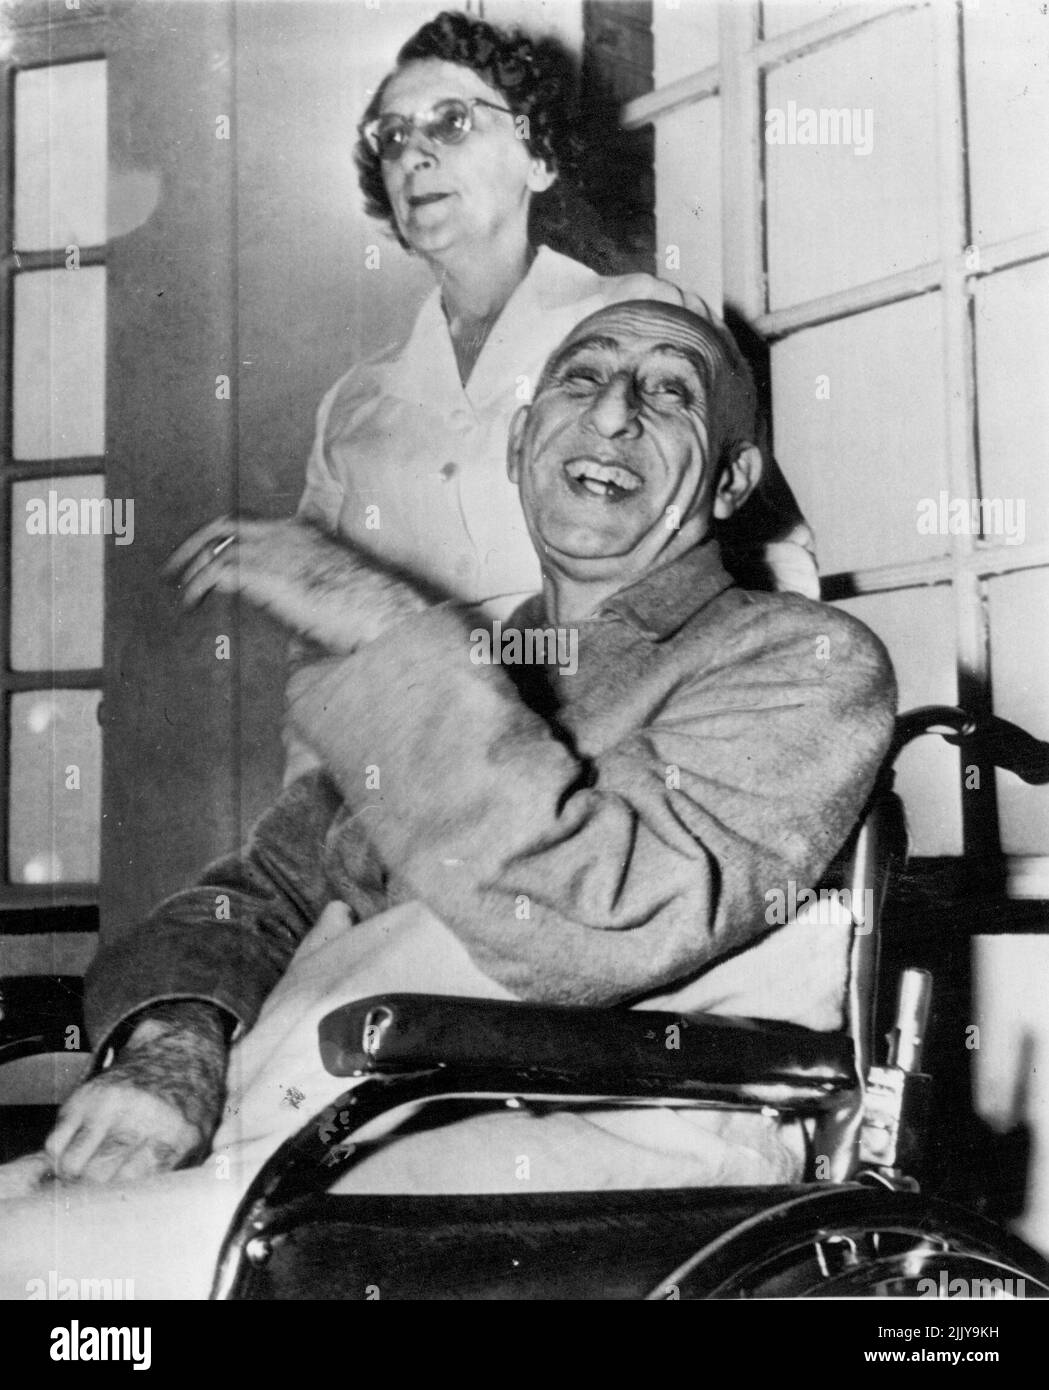 Happy Interlude - Premier Mohammed Mossadegh of Iran enjoys a laugh as he talks with newsmen during a photographic conference at New York Hospital here today. Nurse Ruth Meacham stands behind his wheel chair. The Iranian leader is in New York to give his side of the Iranian-British oil refinery dispute before the United Nations Security Council. He has been in ill-health for some time and is residing at the hospital rather than at a hotel. October 12, 1951. (Photo by AP Wirephoto). Stock Photo